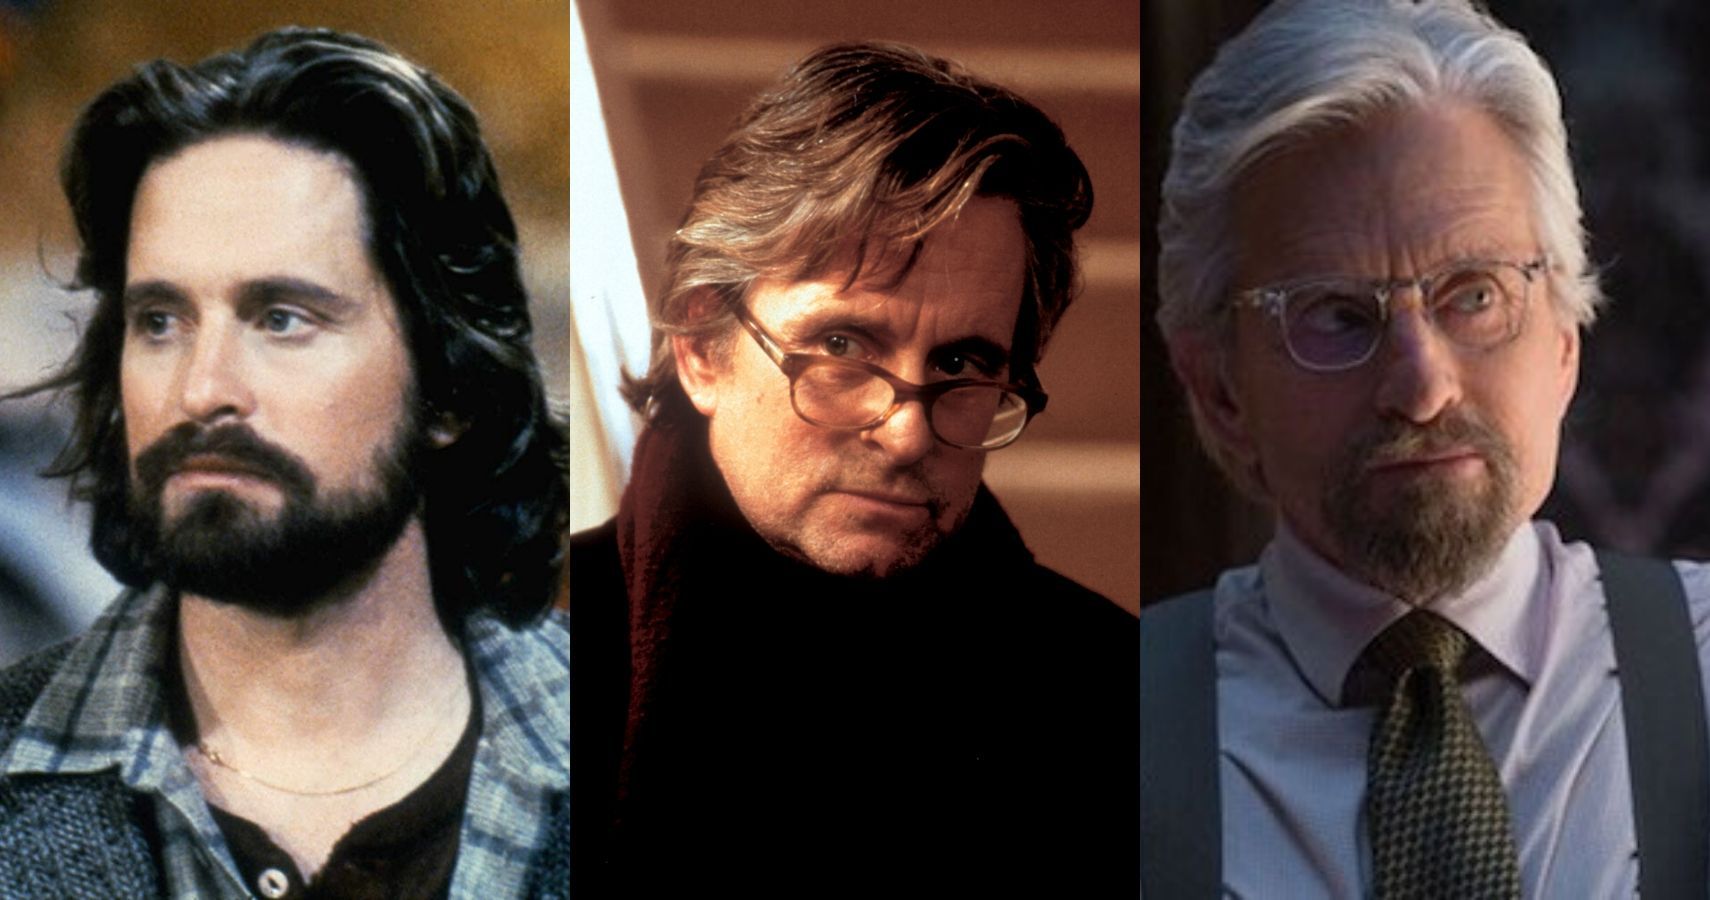 10 Best Michael Douglas Movies According To Rotten Tomatoes Academy award nominations for acting: best michael douglas movies according